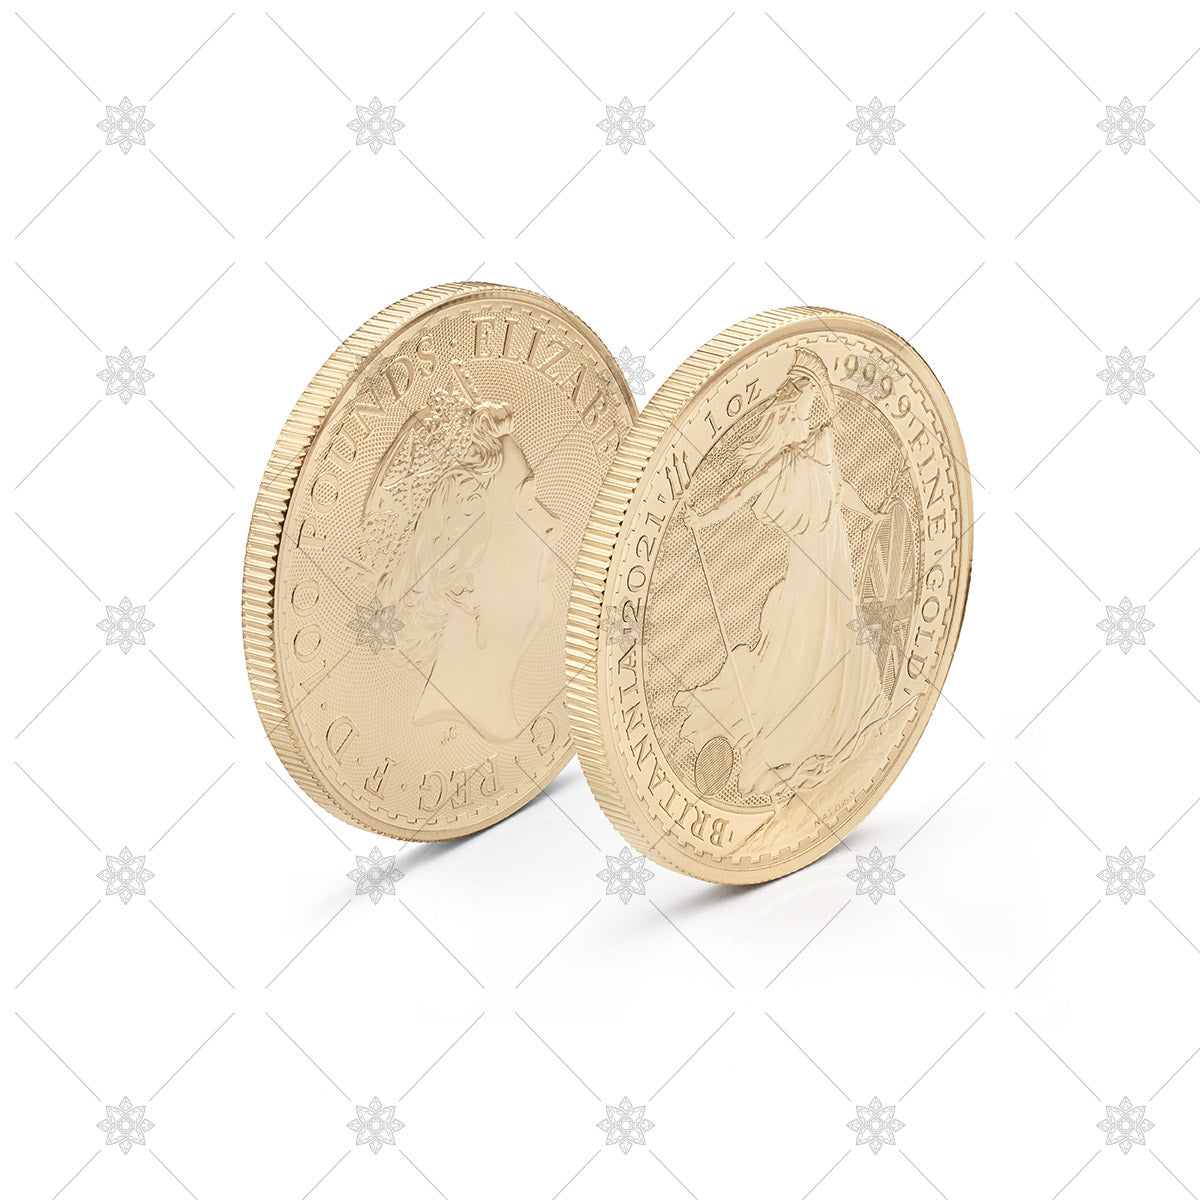 Gold bullion coin side front and back view